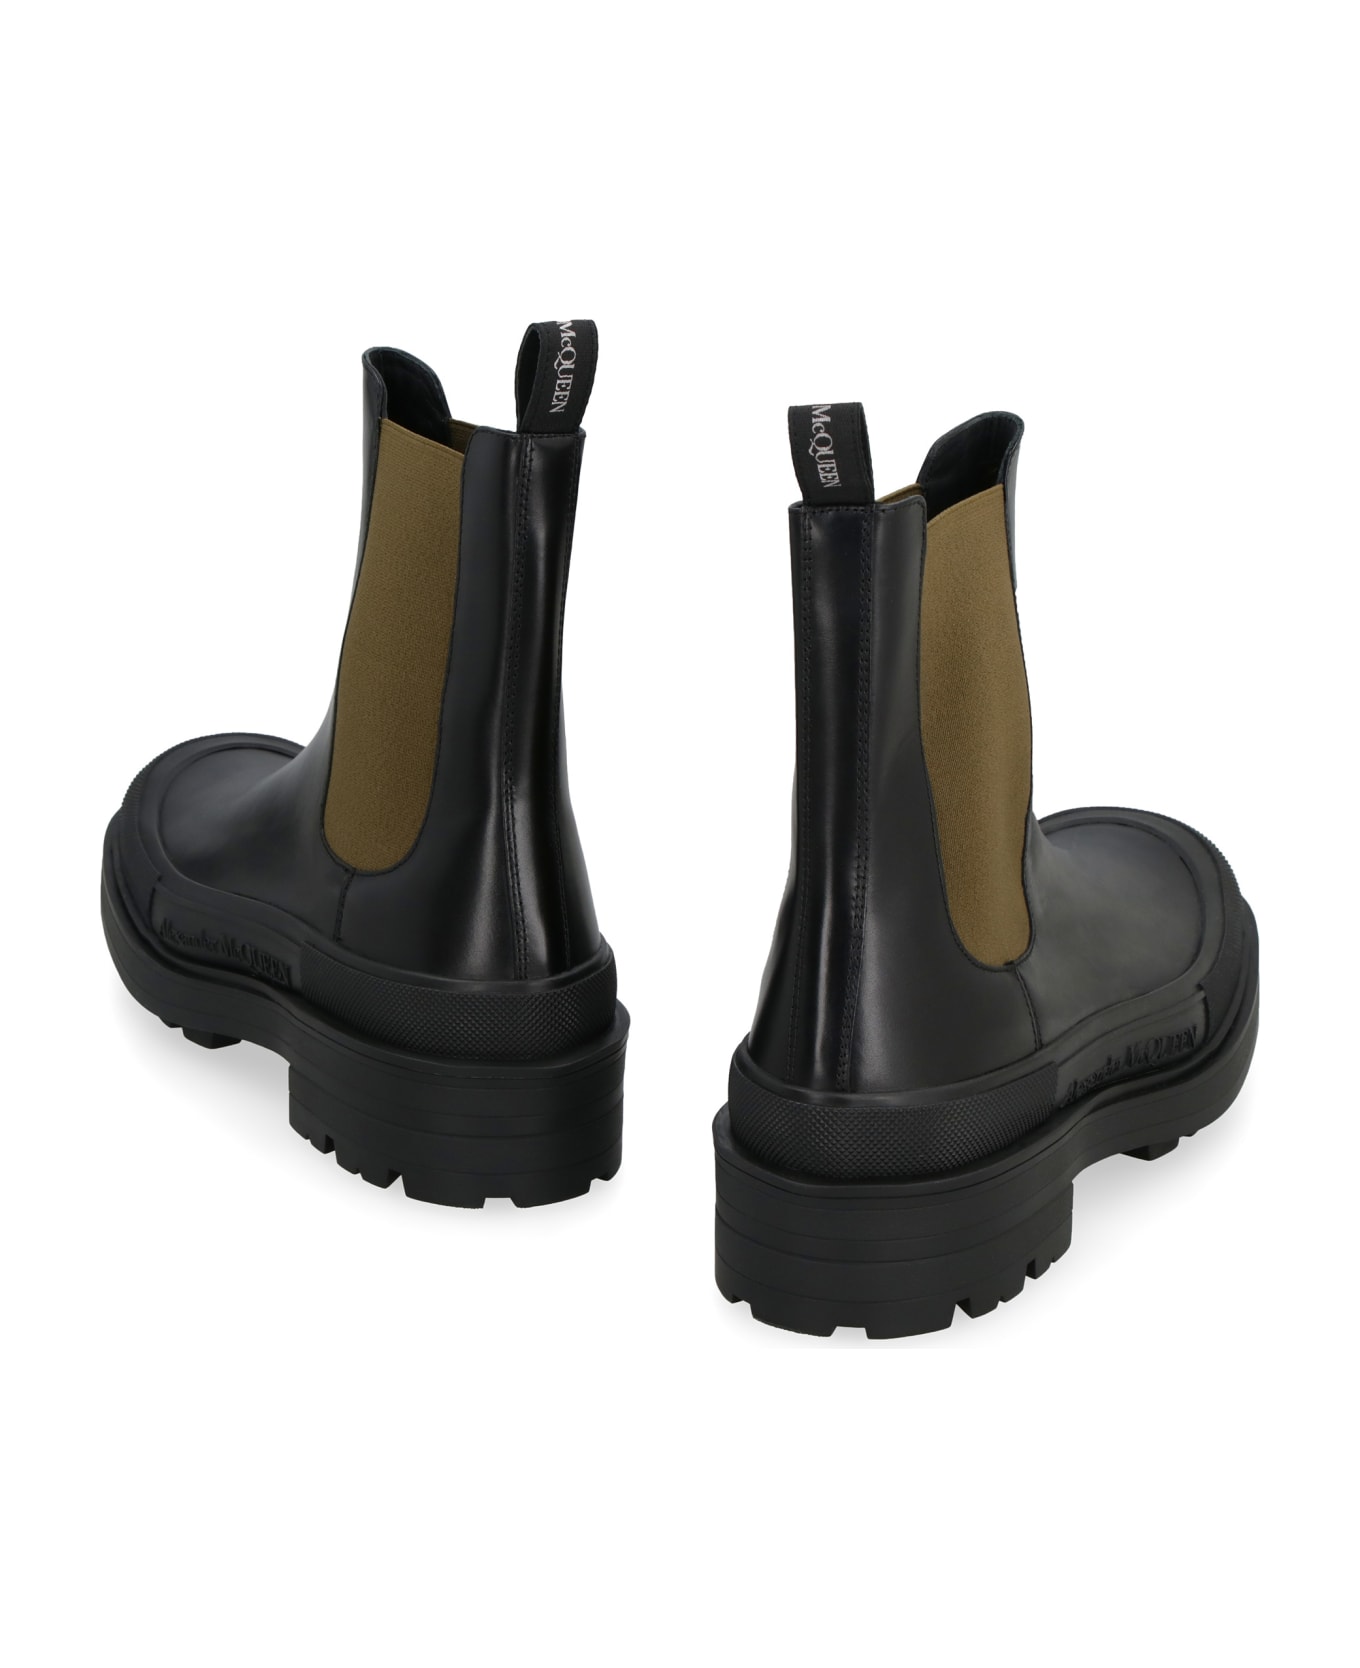 Alexander McQueen Leather Boots - black ブーツ